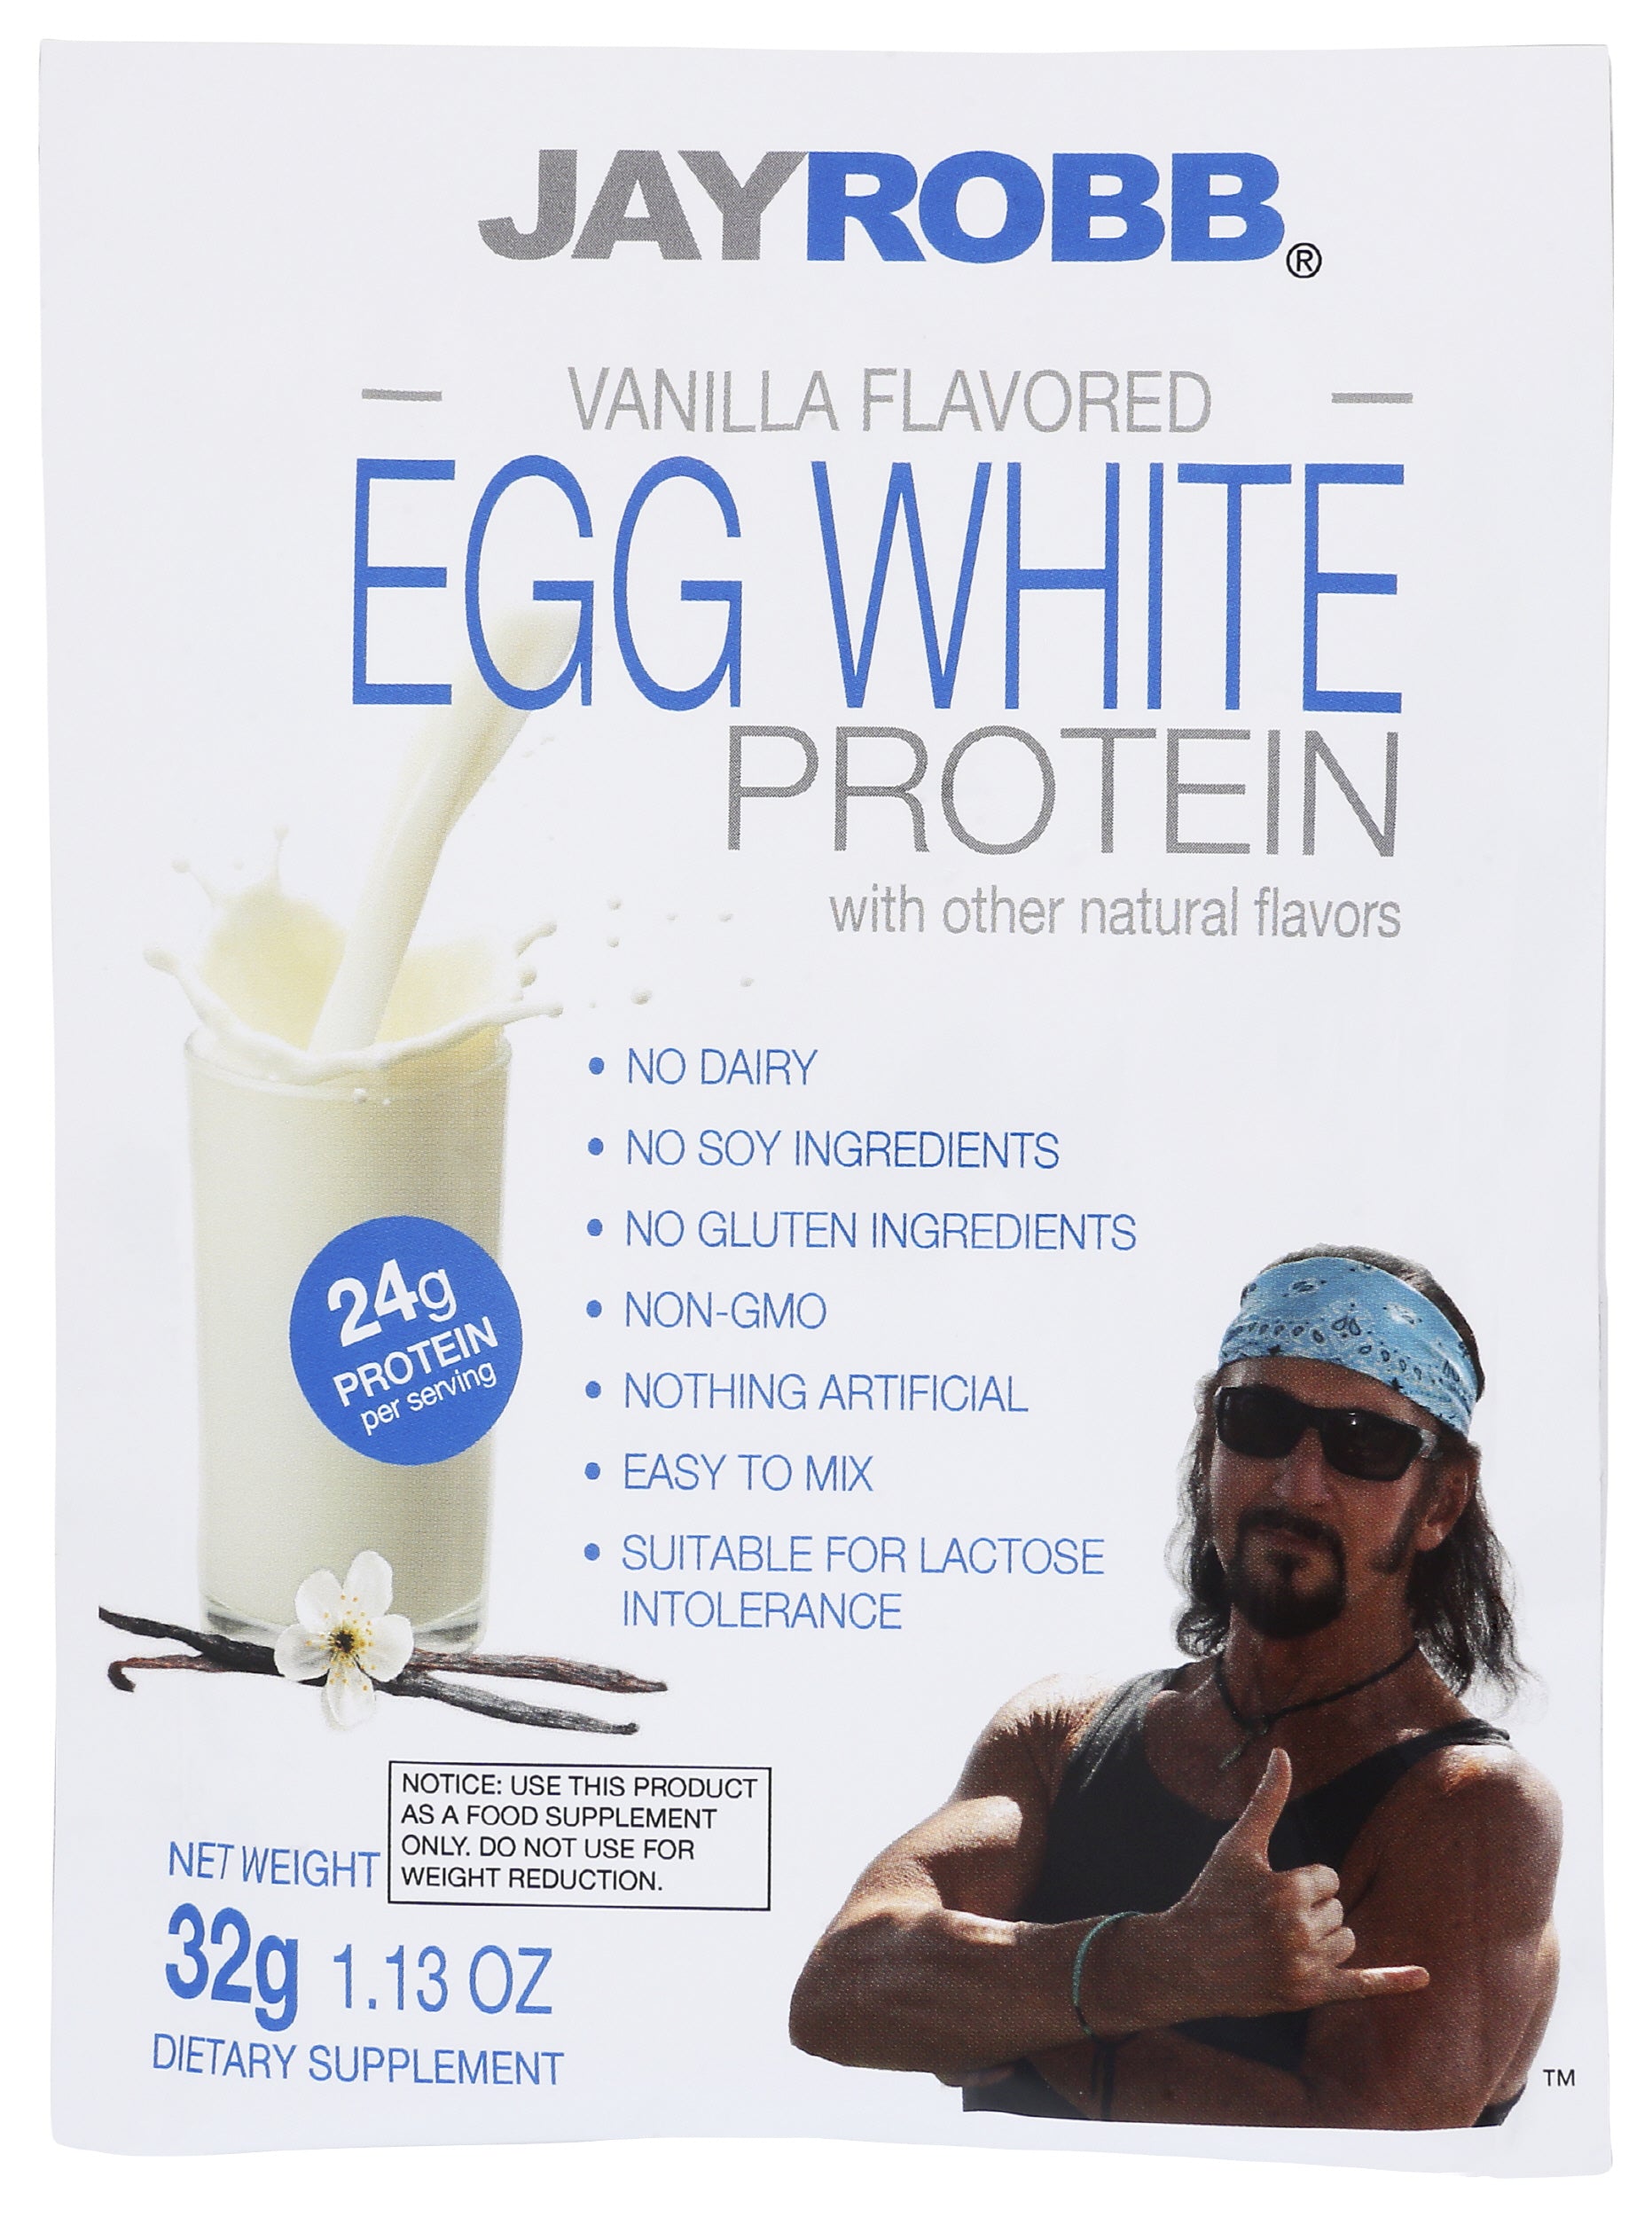 Jay Robb Vanilla Flavored Egg White Protein Powder 32g Front of Bag